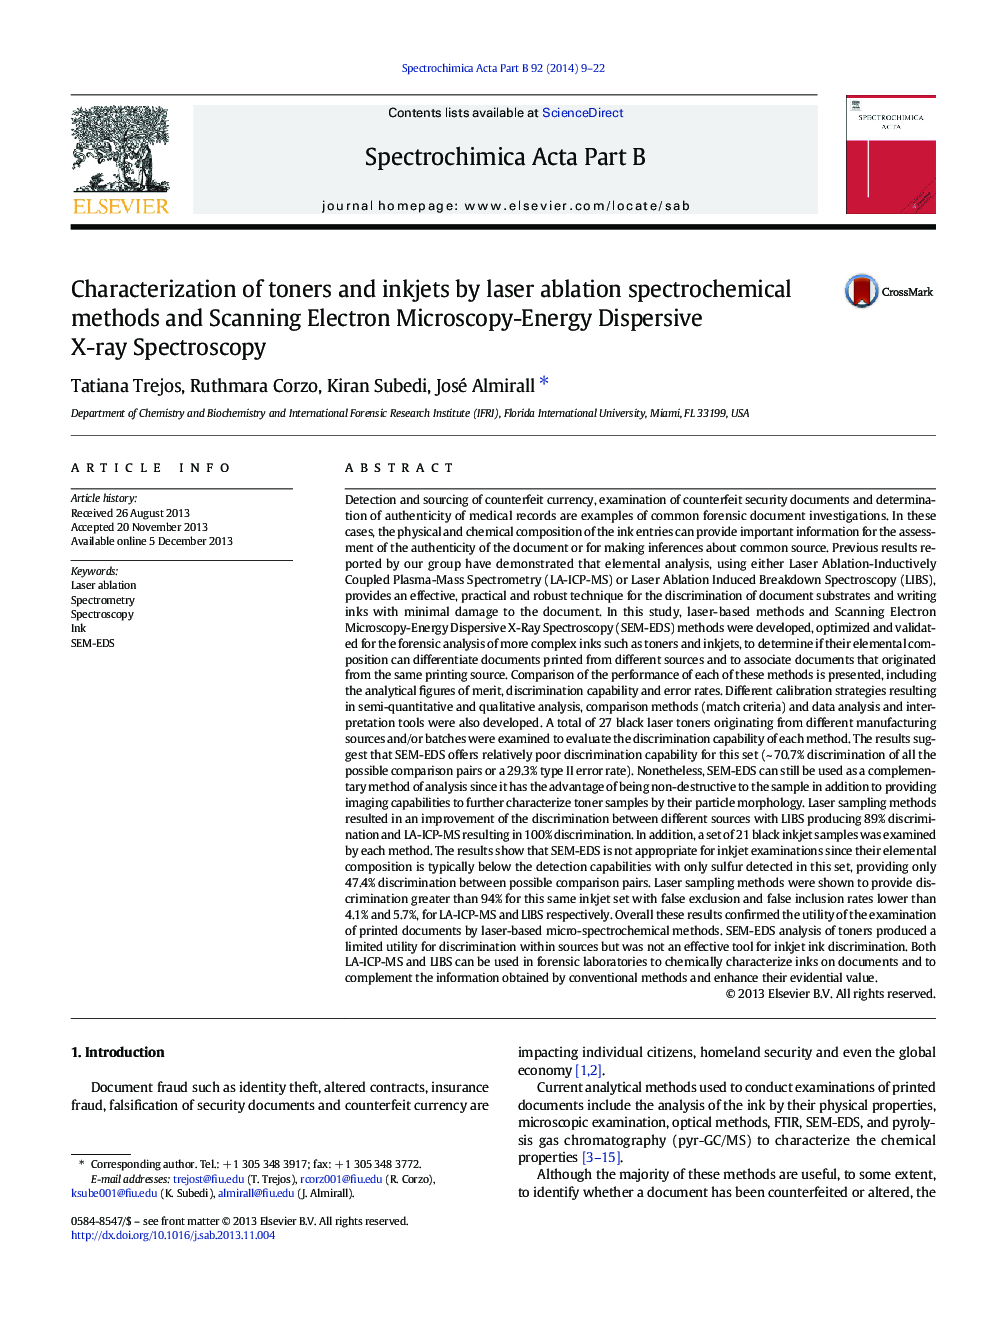 Characterization of toners and inkjets by laser ablation spectrochemical methods and Scanning Electron Microscopy-Energy Dispersive X-ray Spectroscopy